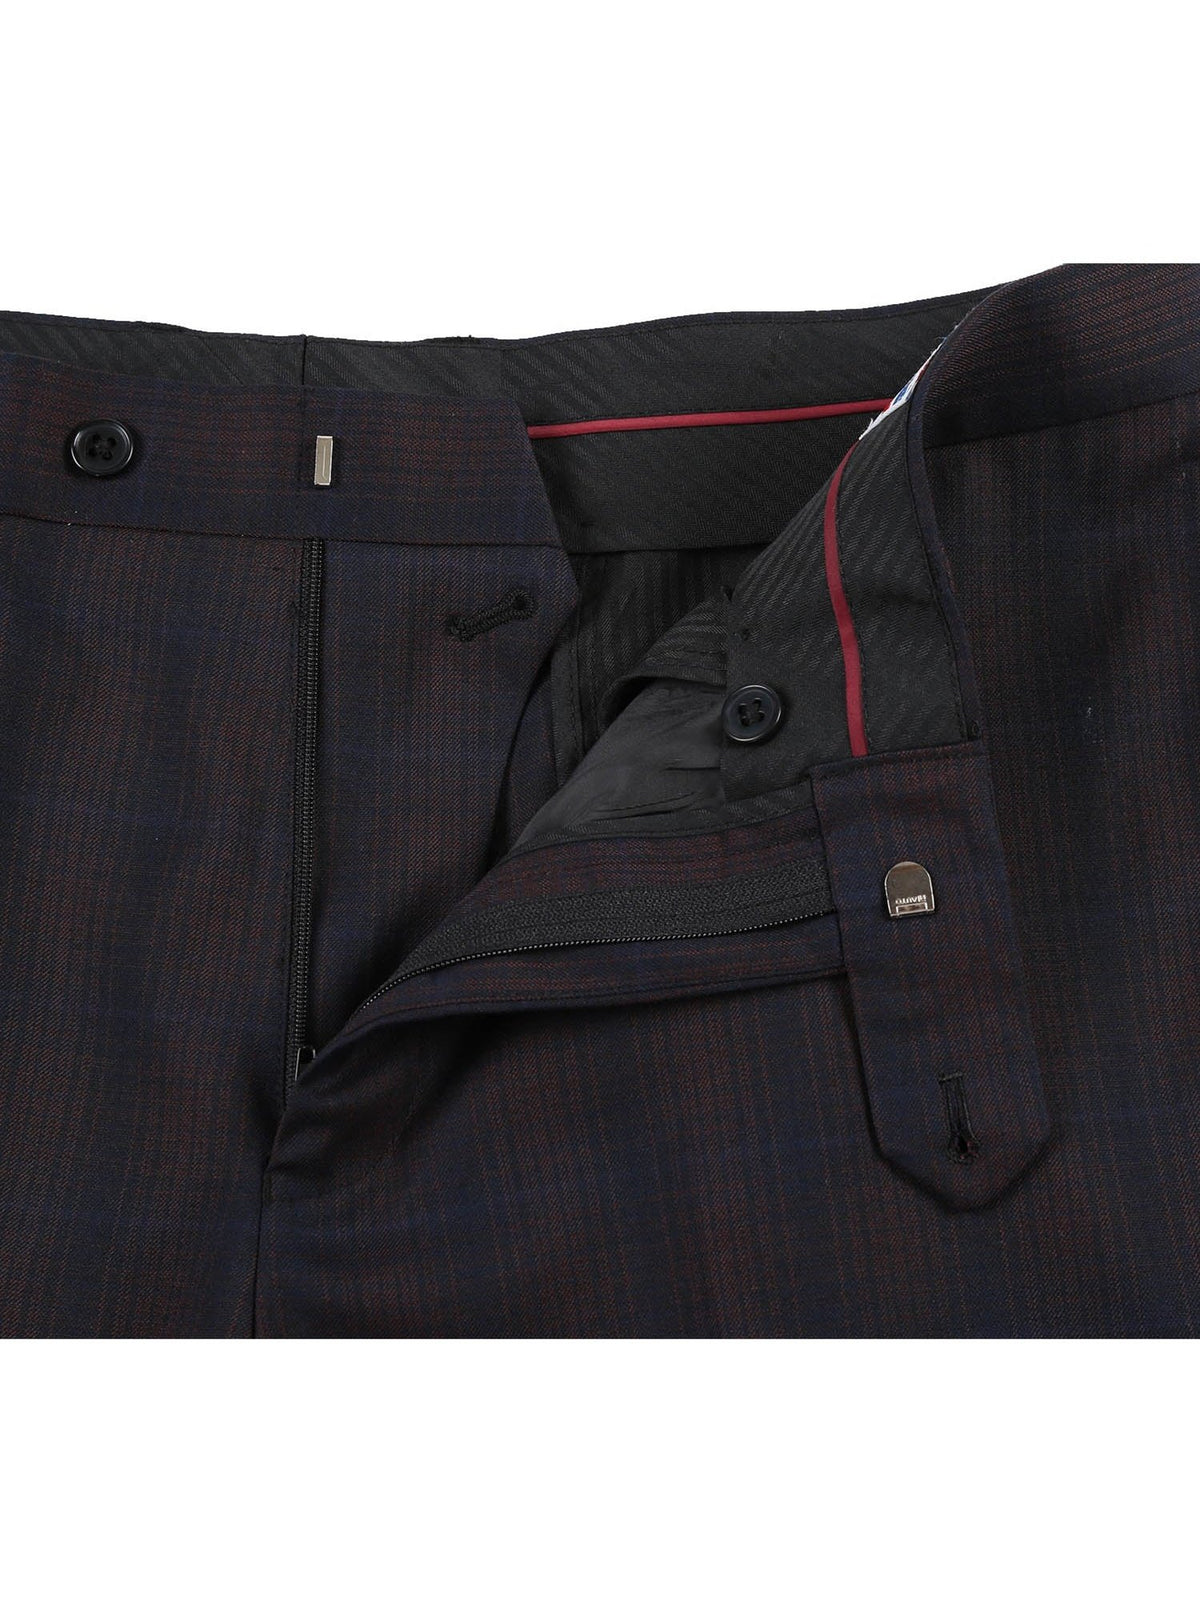 English Laundry Slim Fit Two button Coffee with Red Check Peak Lapel Suit